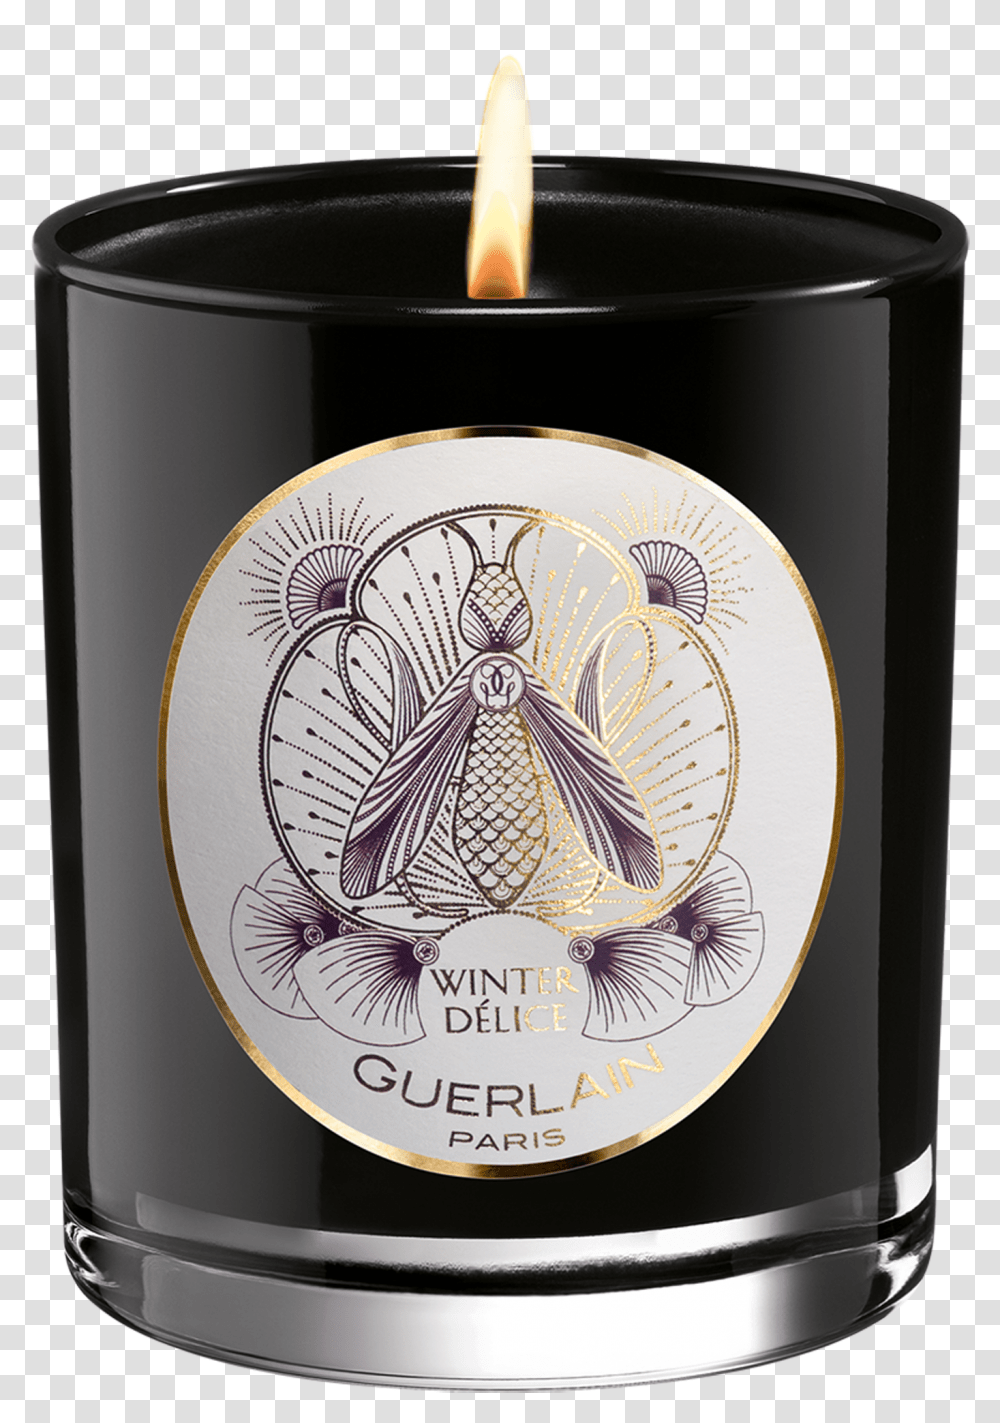 Guerlain Winter Delice, Bird, Animal, Candle, Alcohol Transparent Png